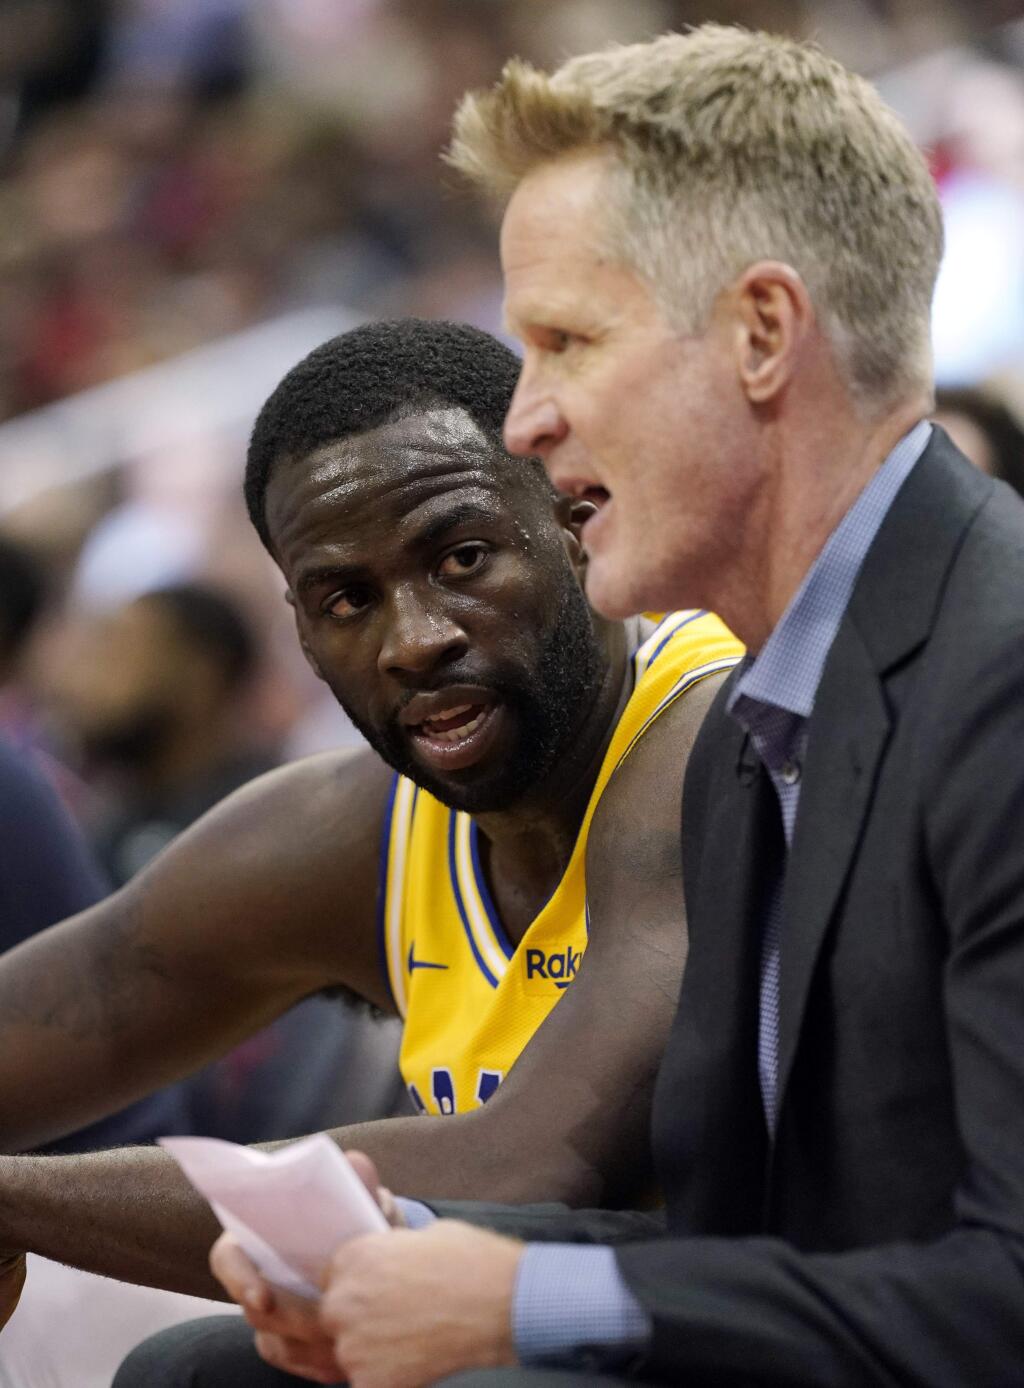 The Golden State Warriors' Draymond Green, left, listens to coach Steve Kerr during the second half against the Houston Rockets Thursday, Nov. 15, 2018, in Houston. The Rockets won 107-86. (AP Photo/David J. Phillip)